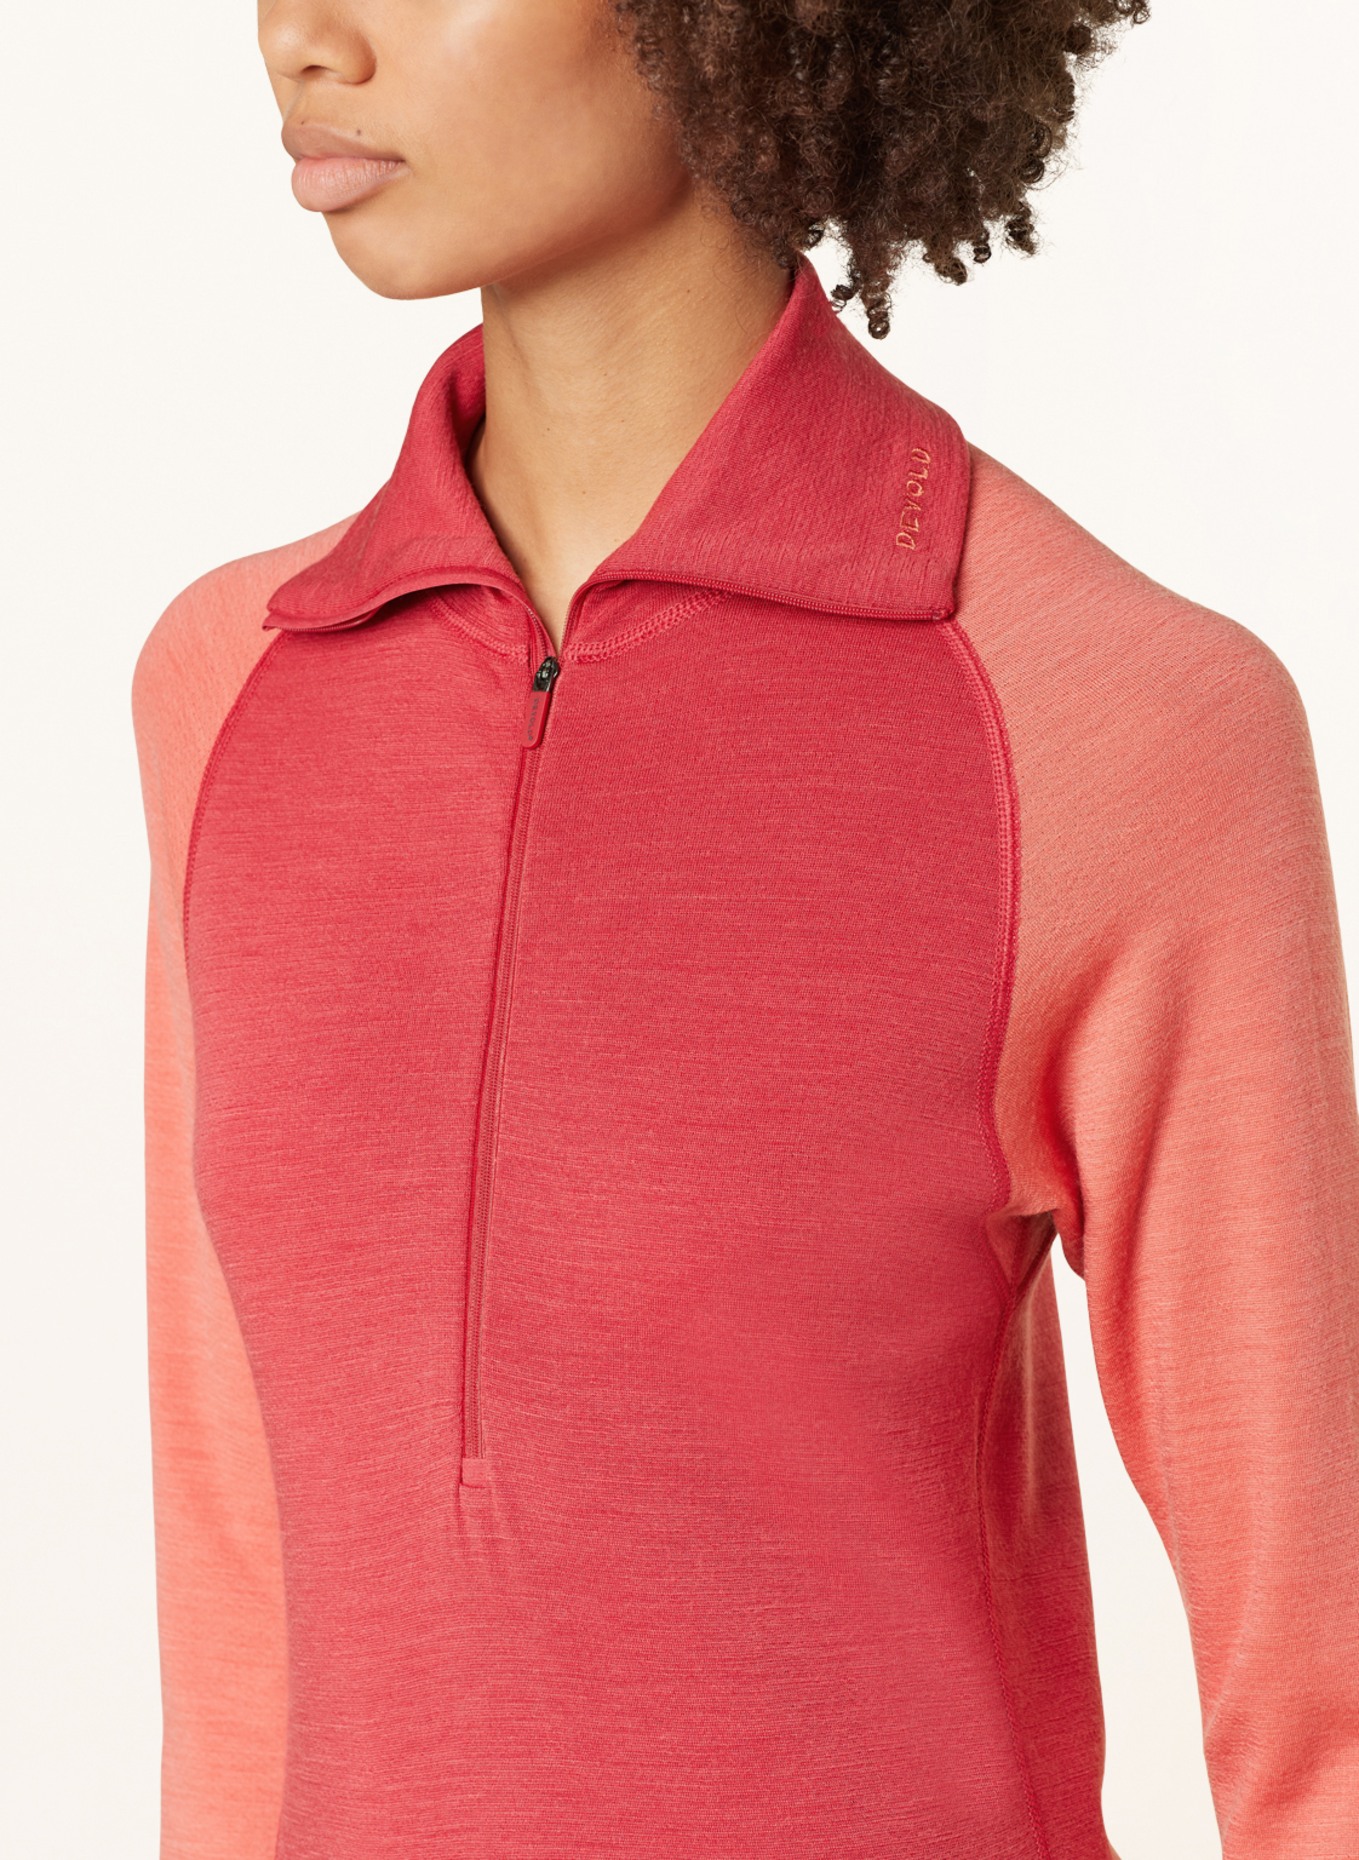 DEVOLD Functional underwear shirt EXPEDITION made of merino wool, Color: RED/ SALMON (Image 4)